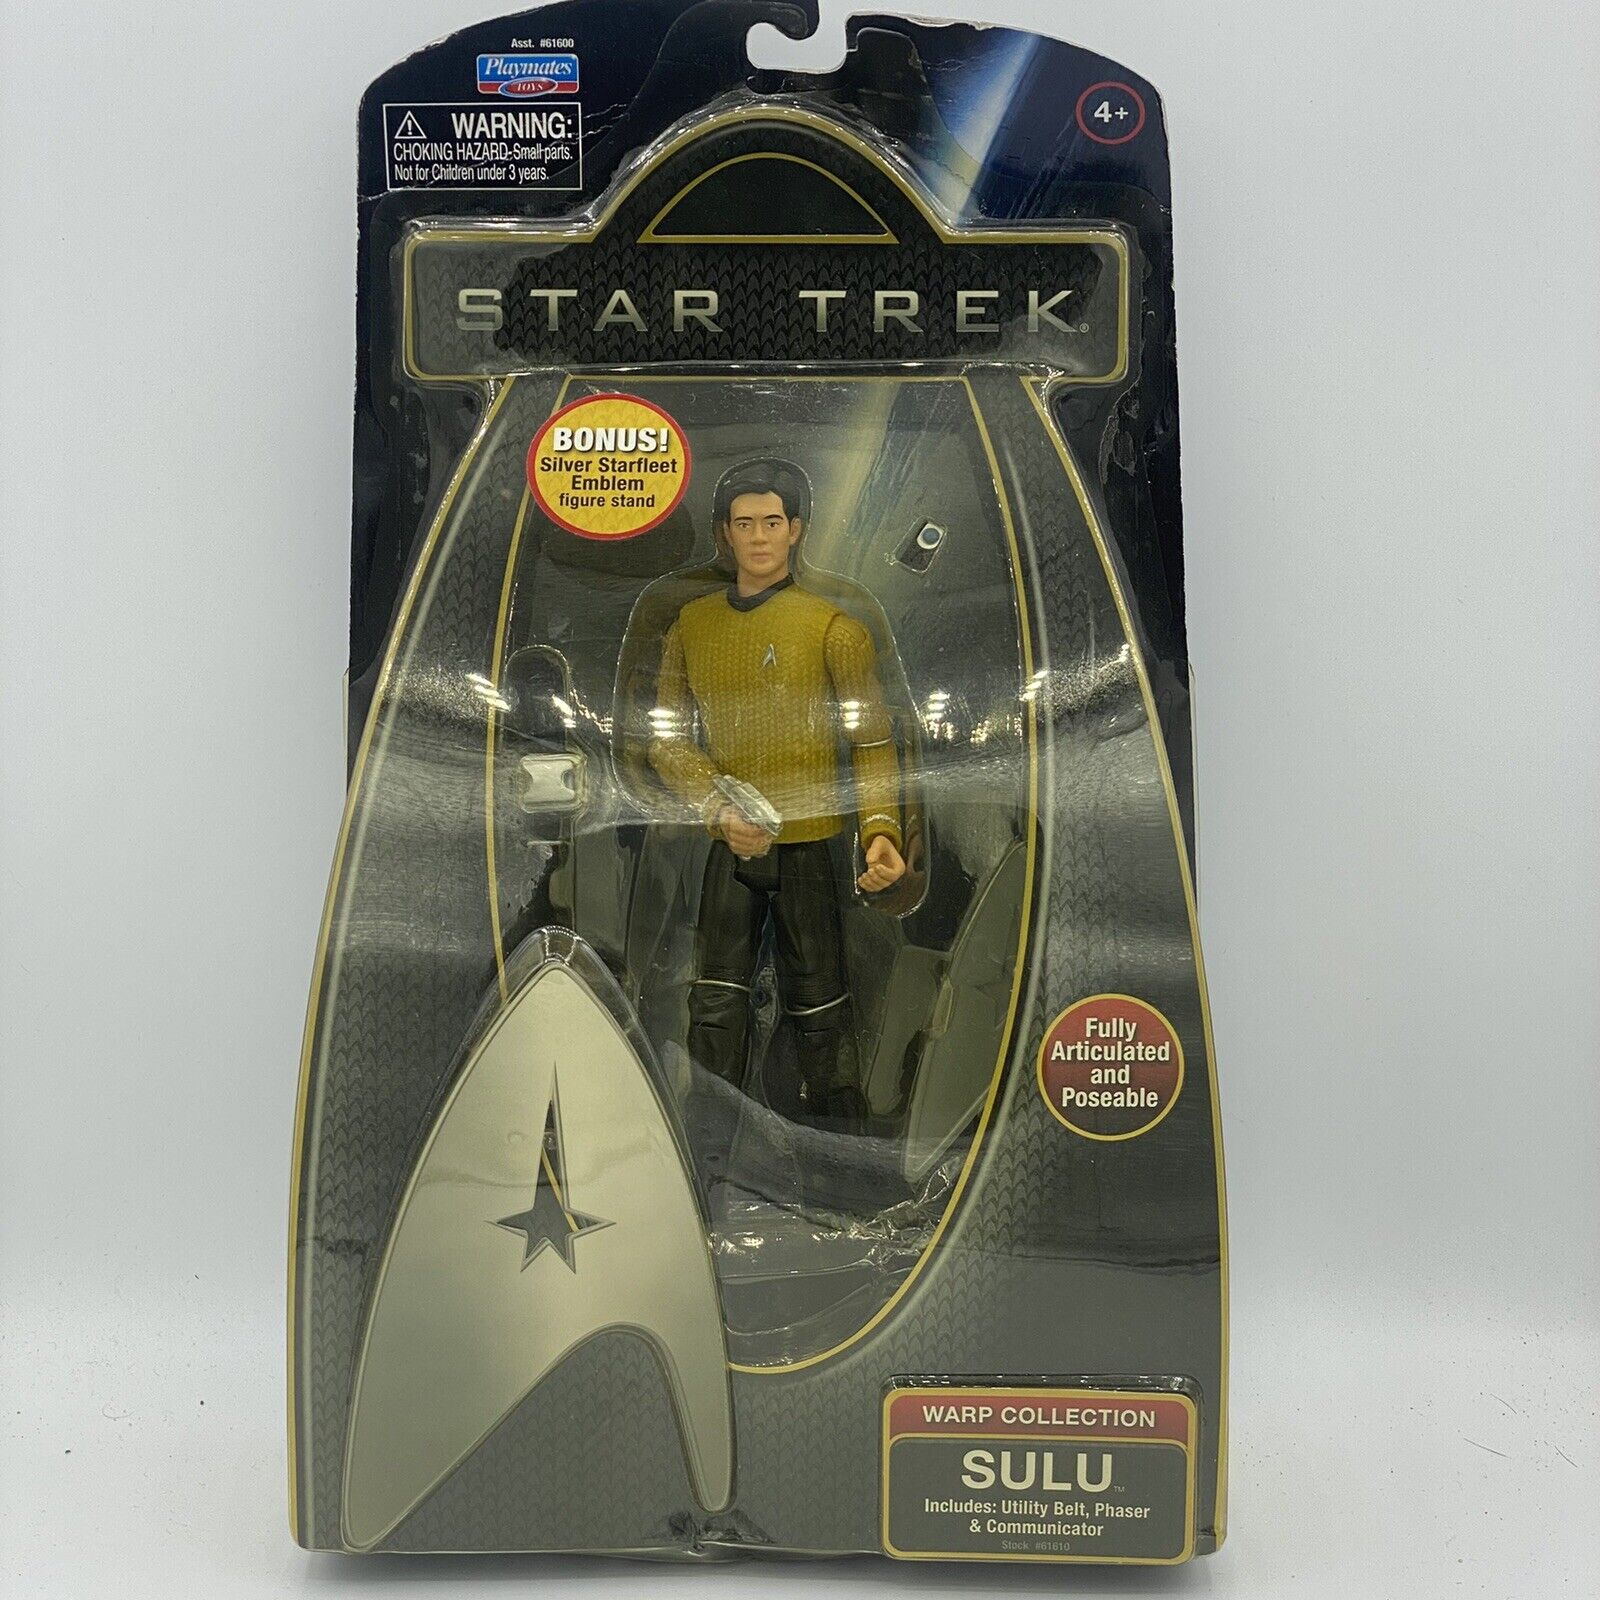 NEW 2009 Playmates Star Trek Command Collection Sulu Action Figure sealed